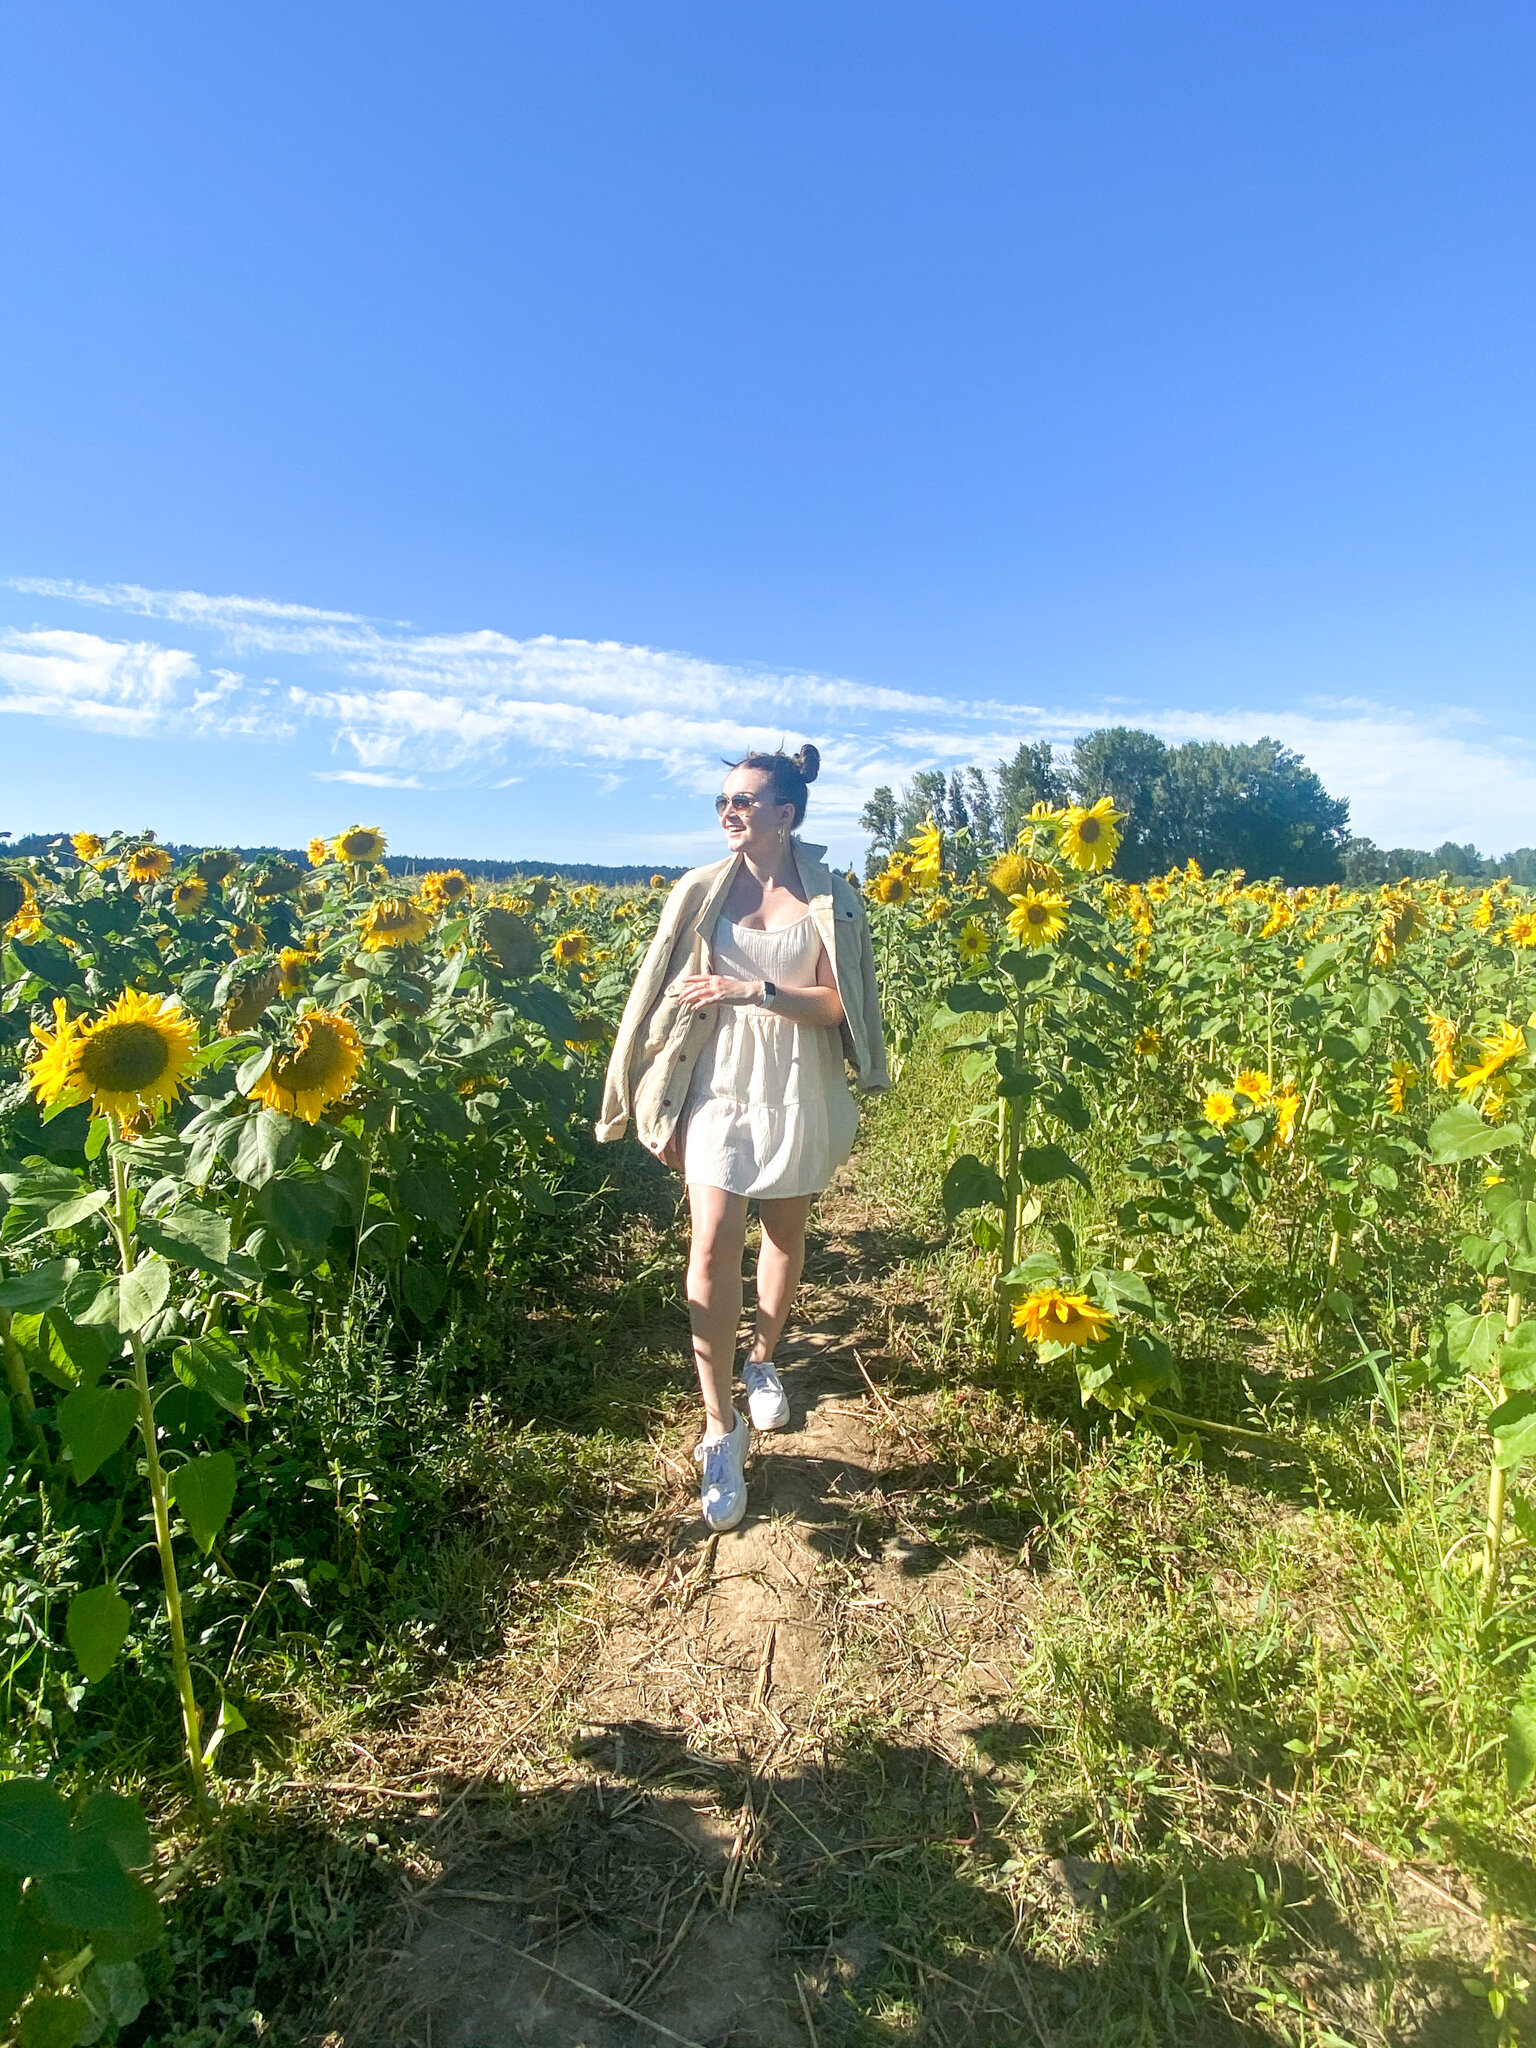 Poses in sunflower field